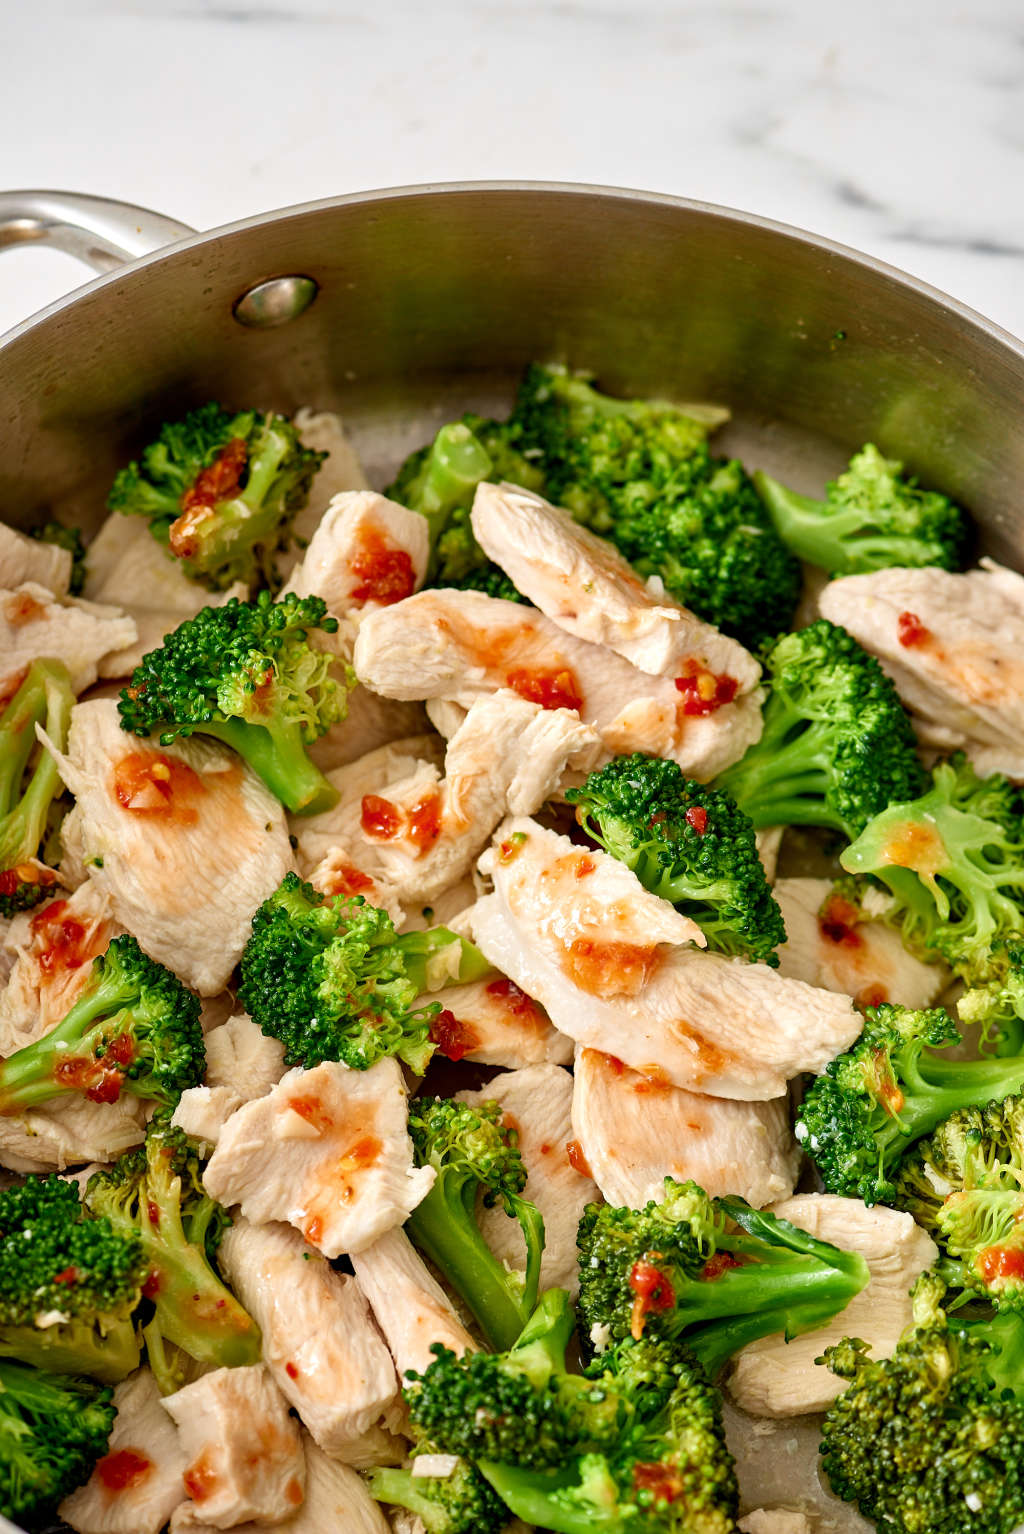 How To Make Chicken and Broccoli Stir-Fry in Any Pan | Kitchn